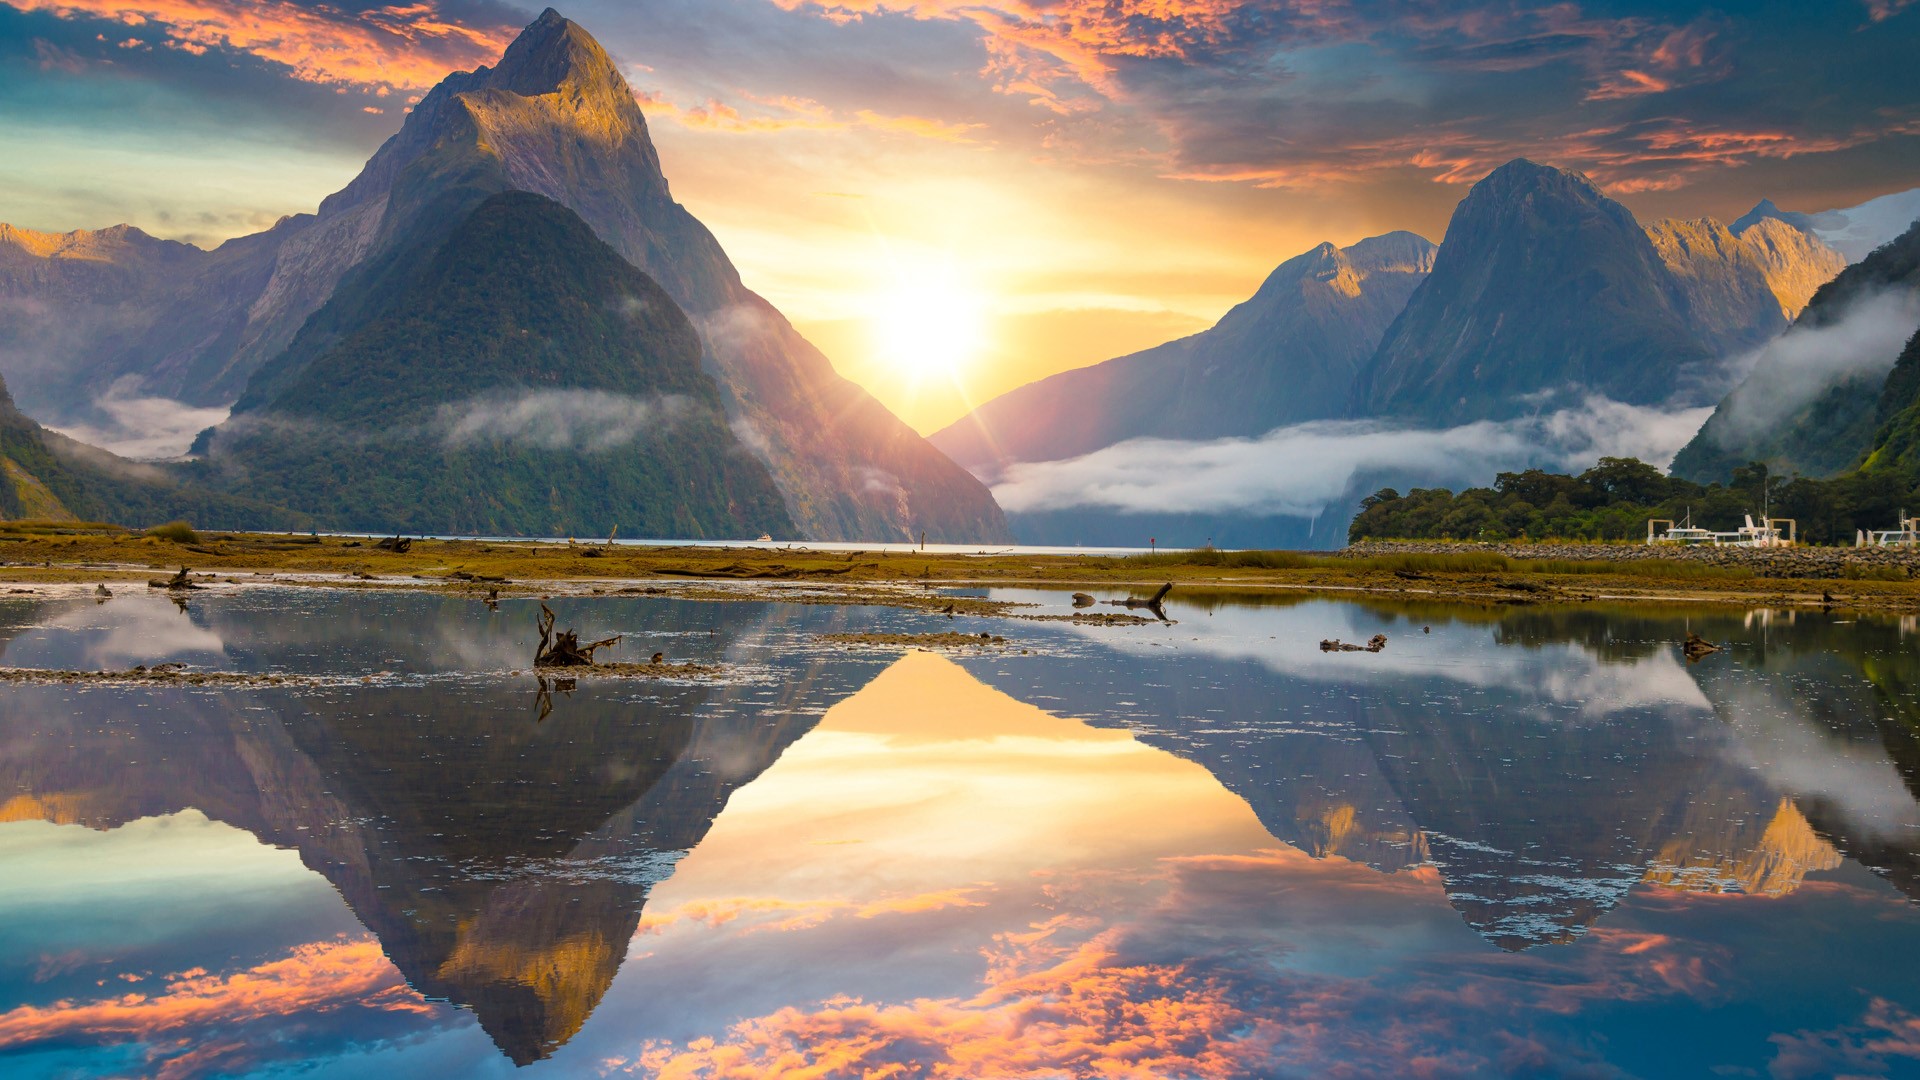 Mitre Peak rising from the Milford Sound fiord Fiordland national park New Zealand  Windows  